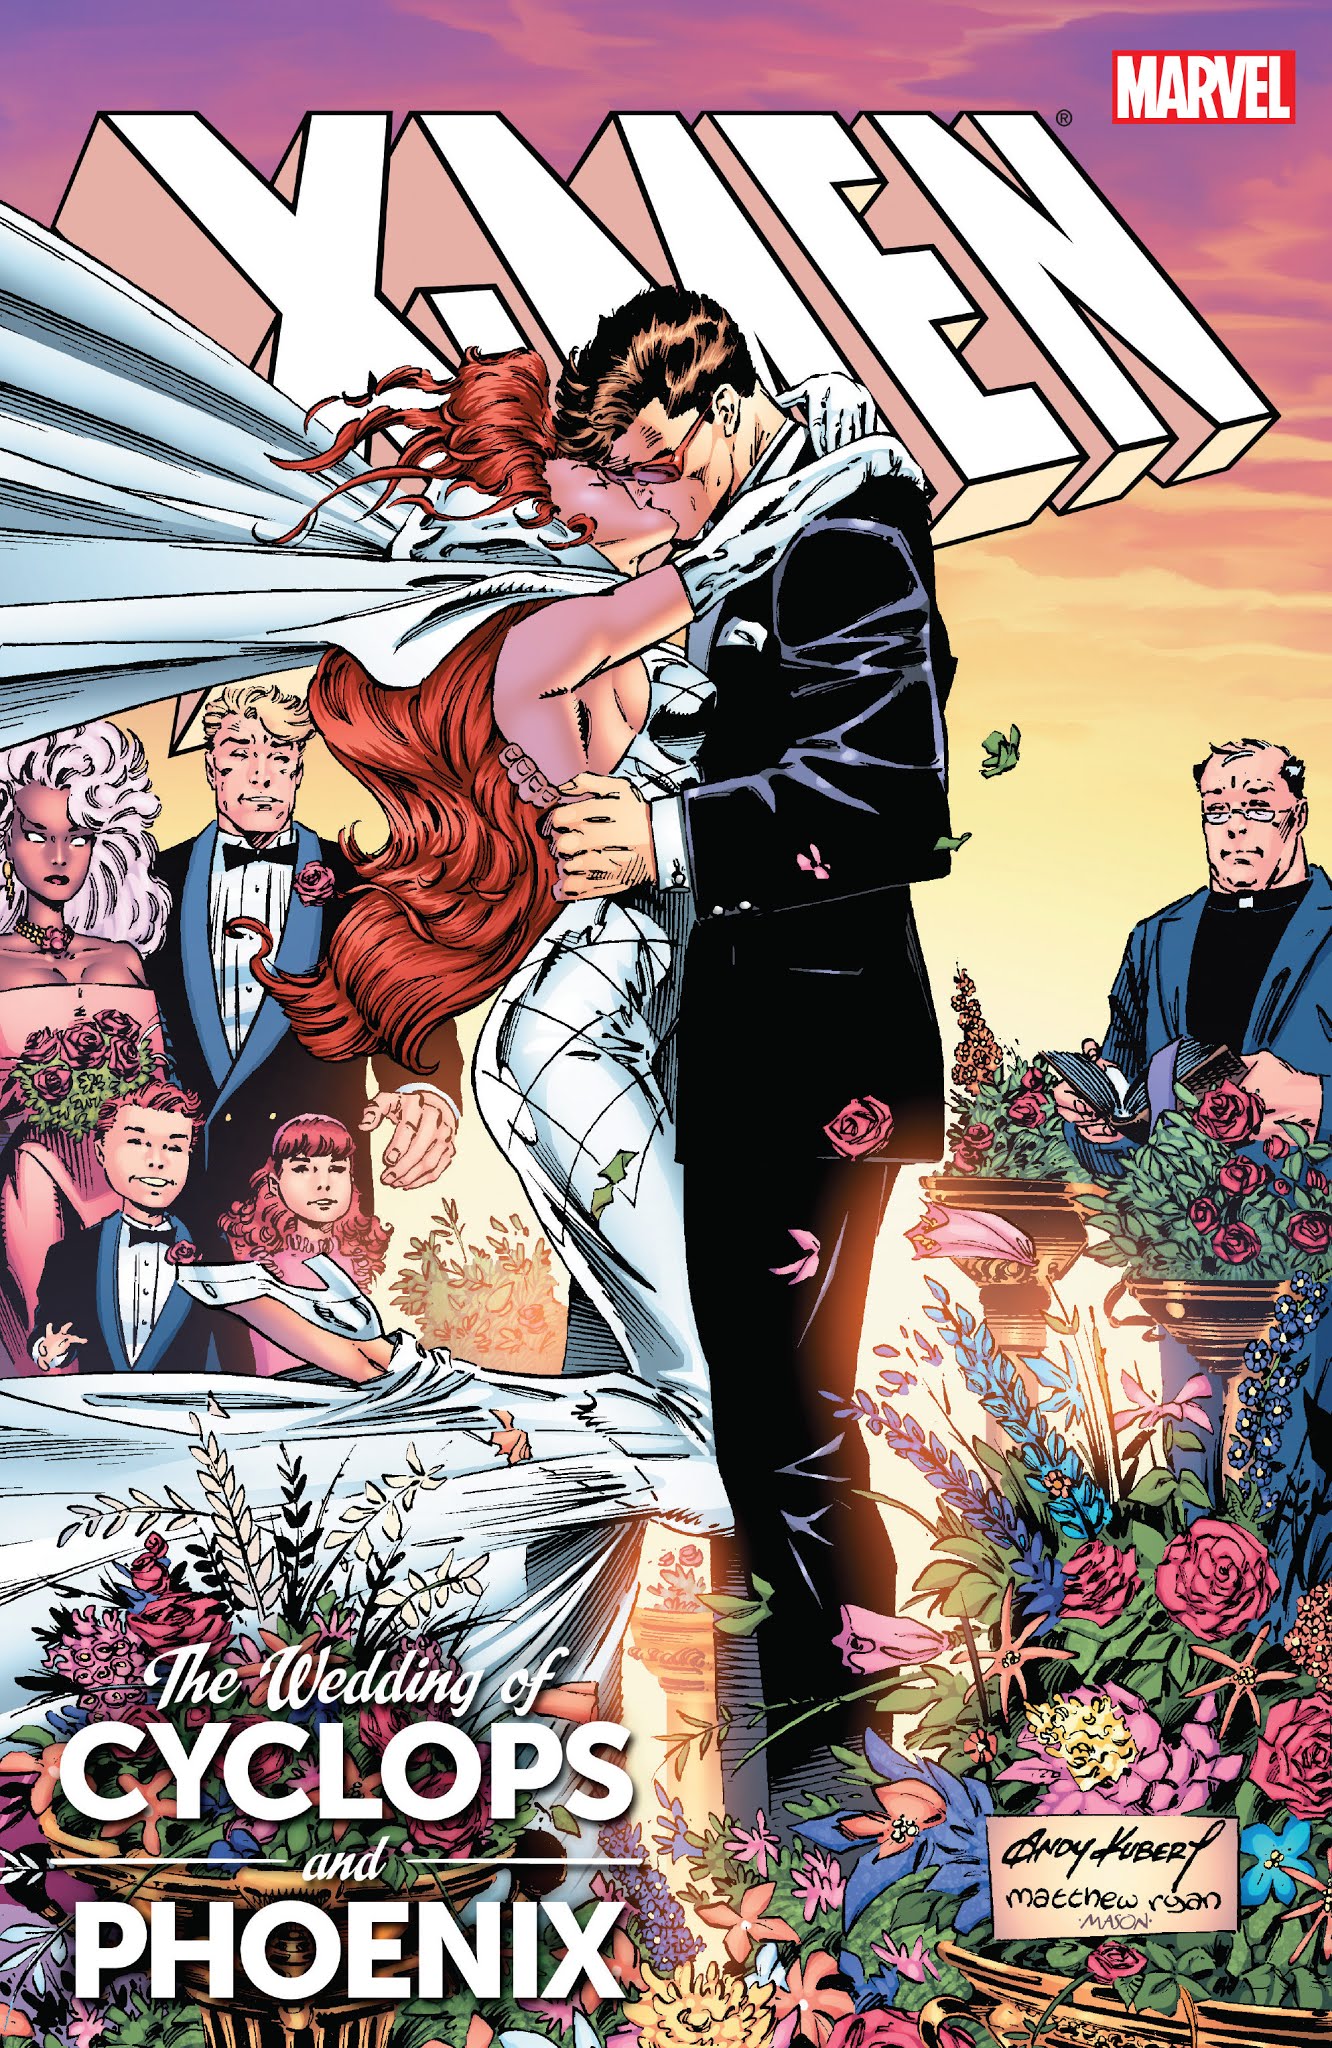 Read online X-Men: The Wedding of Cyclops and Phoenix comic -  Issue # TPB Part 1 - 1